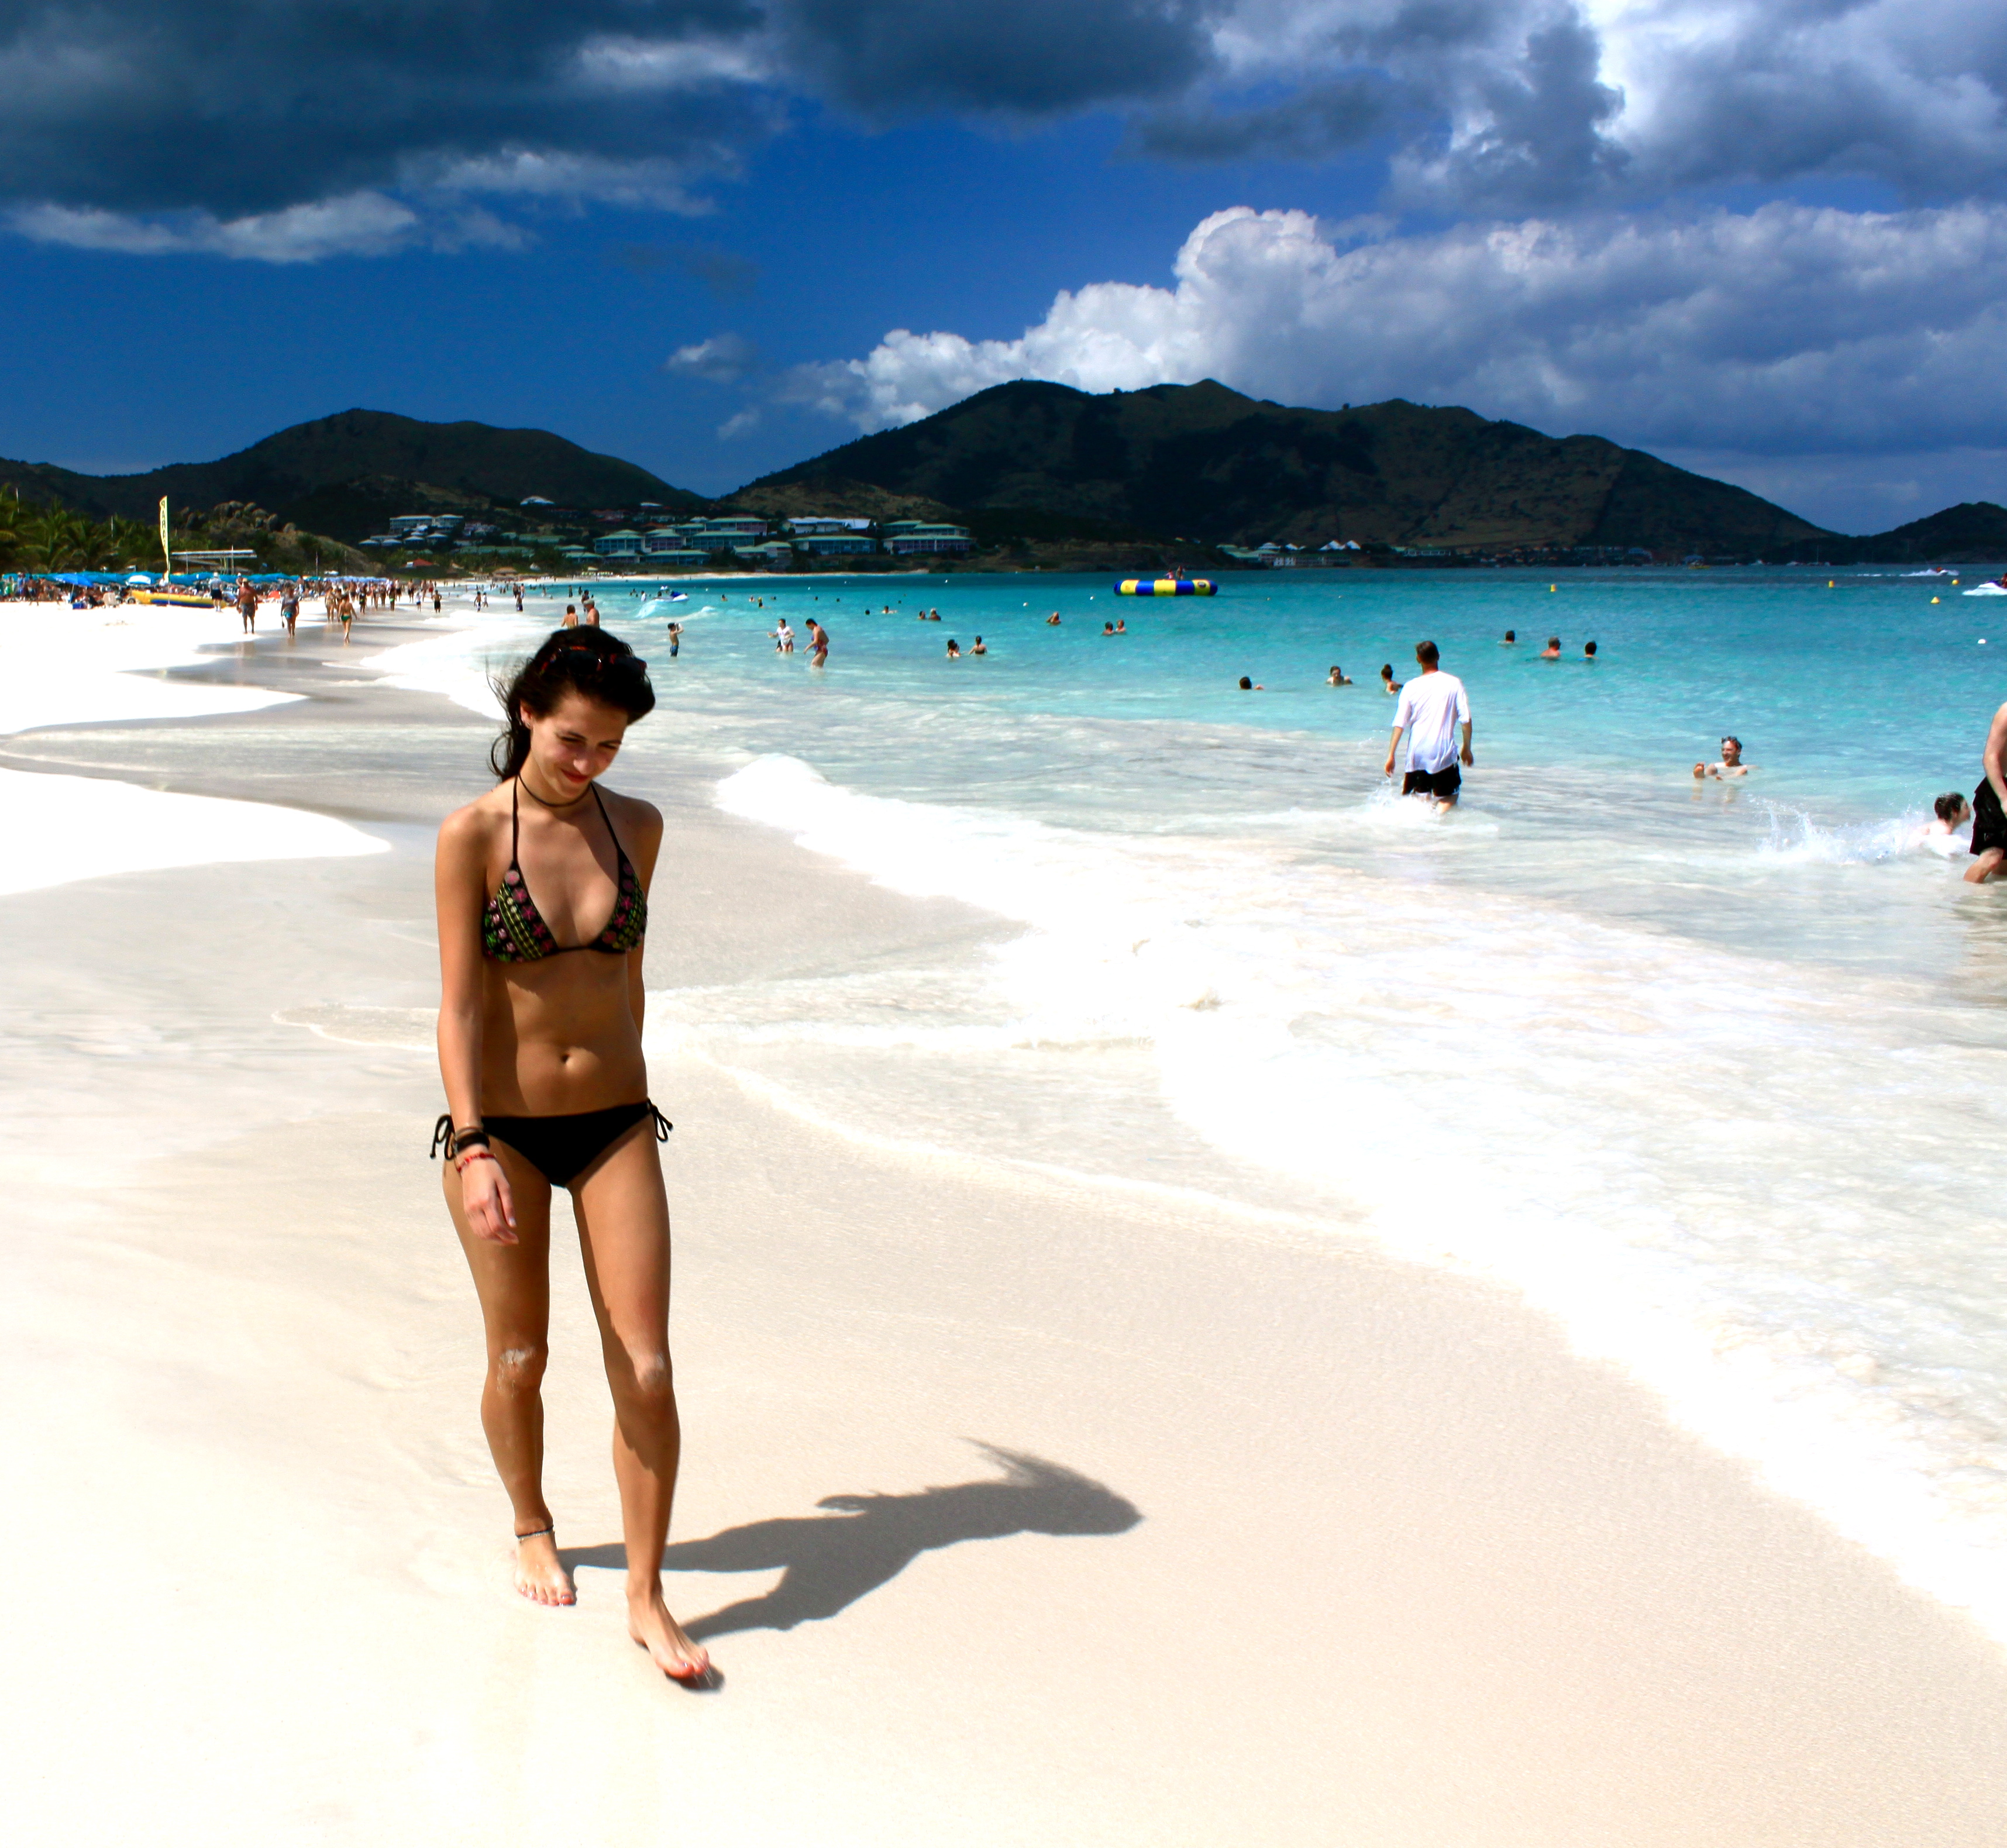 A woman walking at the beach side in Caribbean